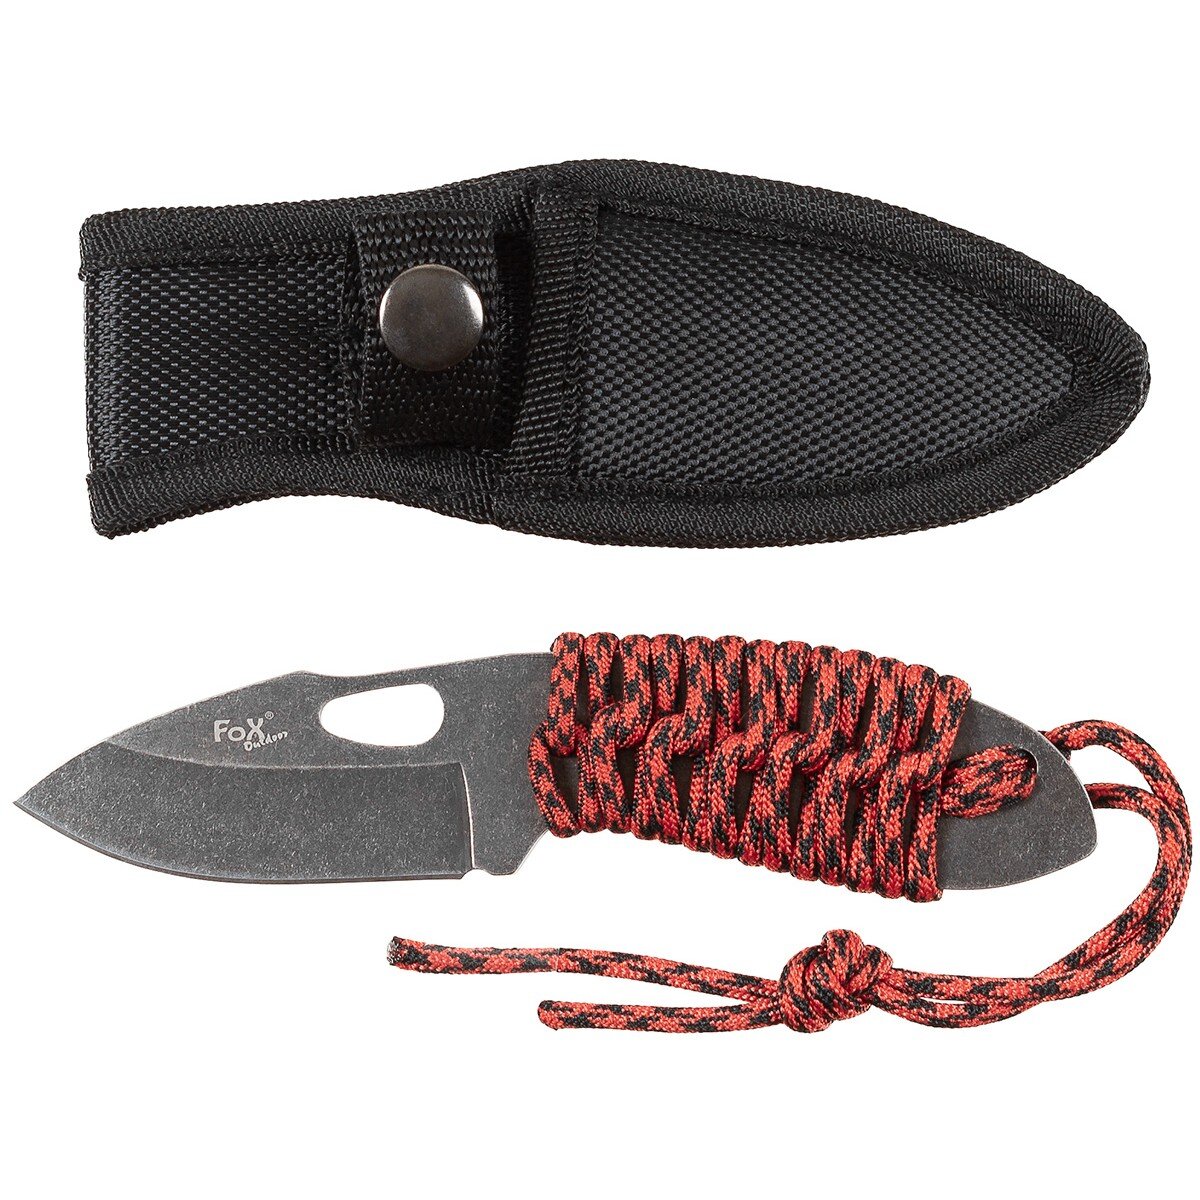 Knife, "Redrope", small, wrapped handle, sheath